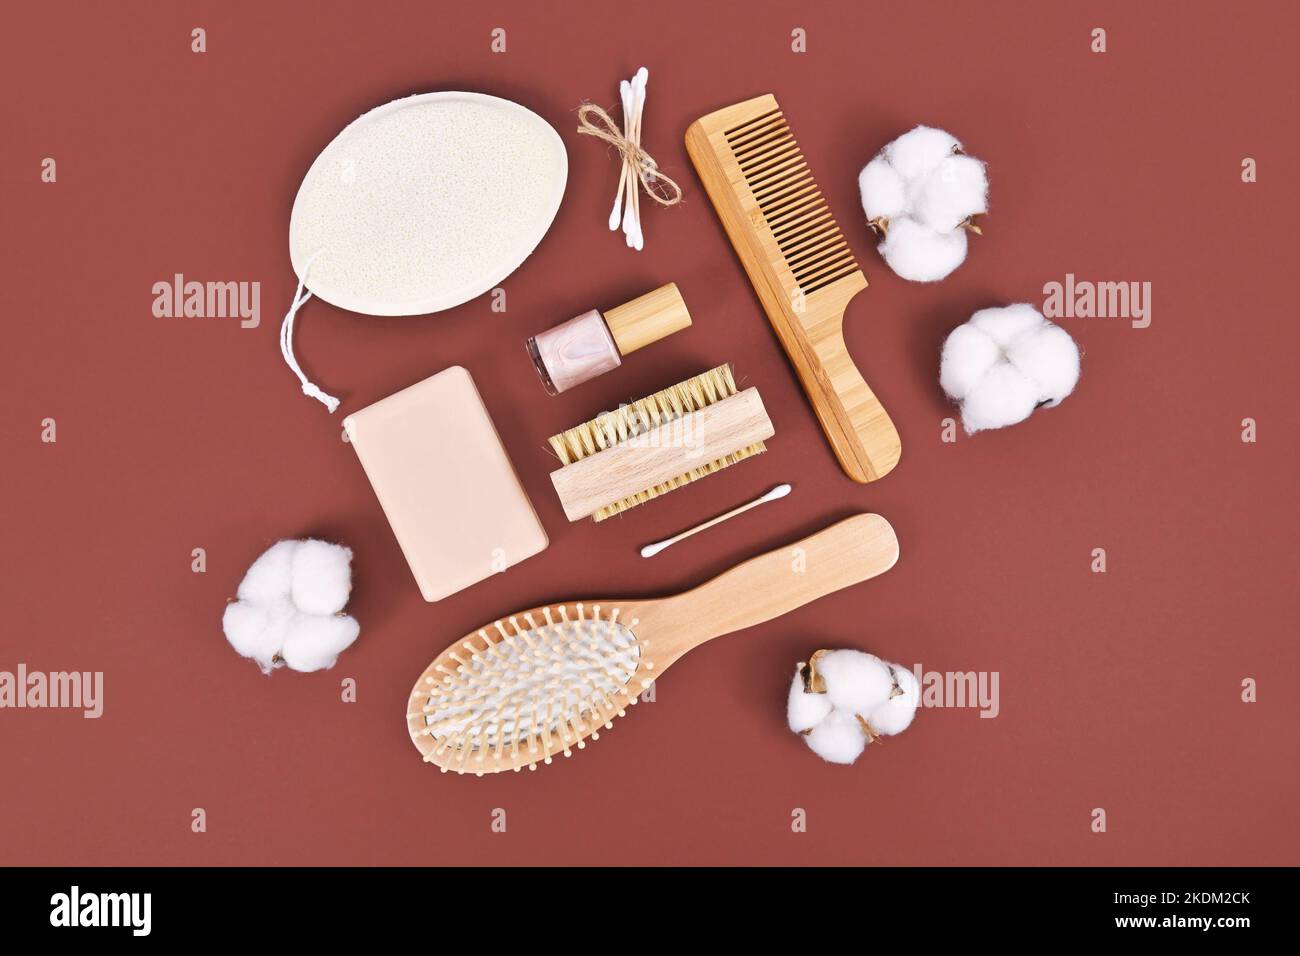 Eco friendly wooden beauty and hygiene products like comb and soap on brown background Stock Photo